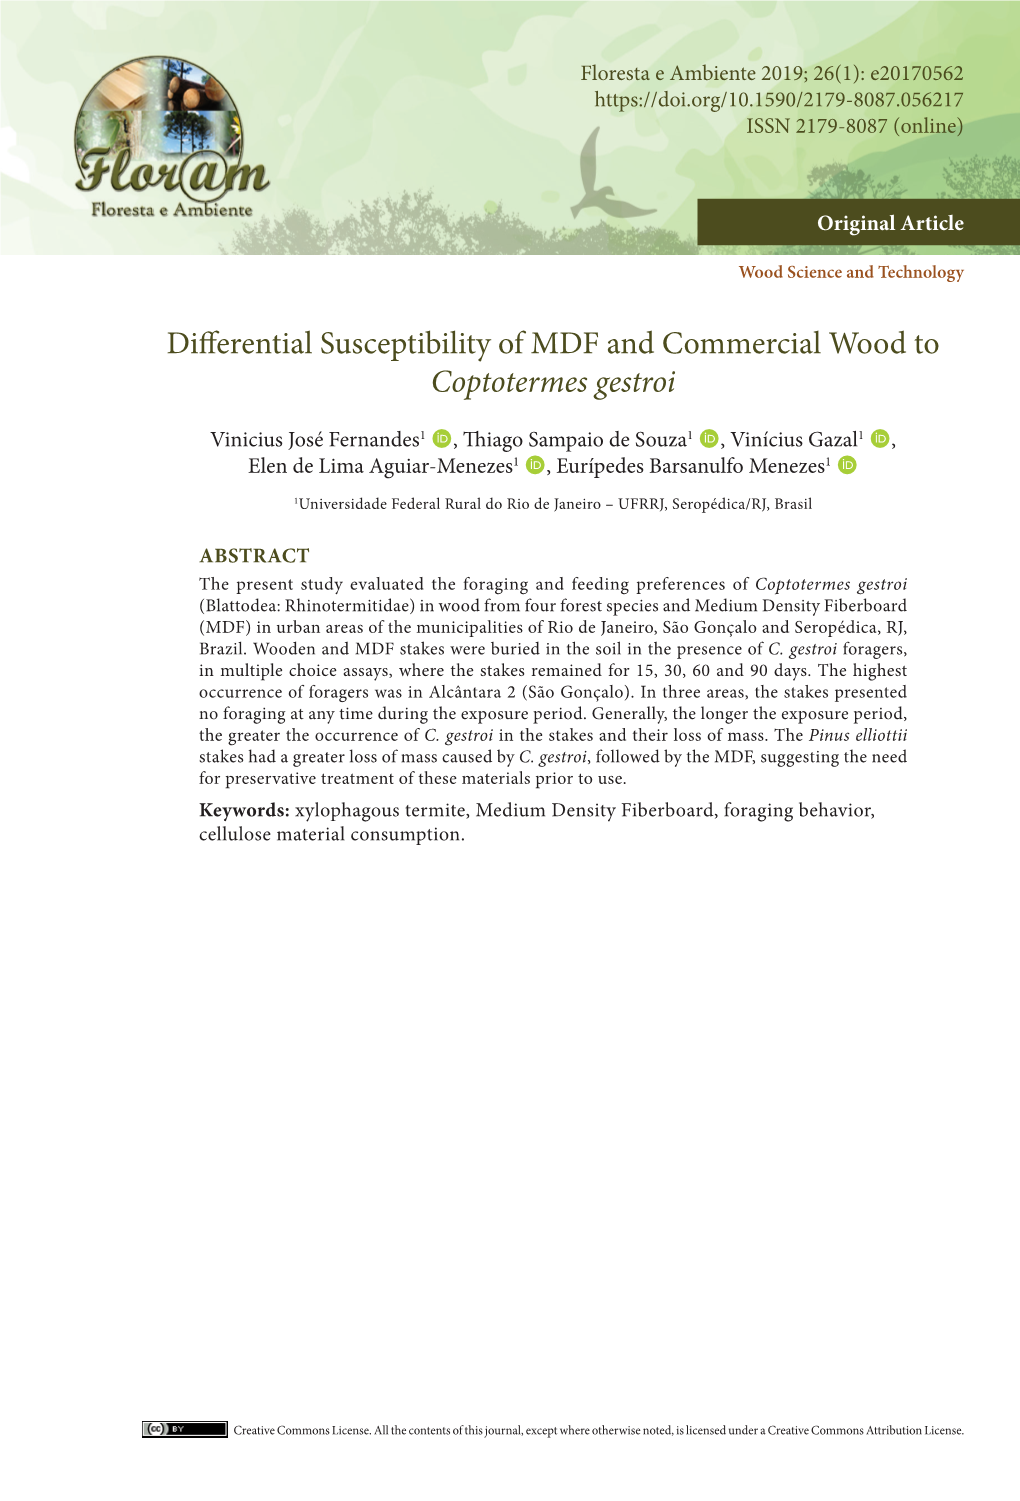 Differential Susceptibility of MDF and Commercial Wood to Coptotermes Gestroi